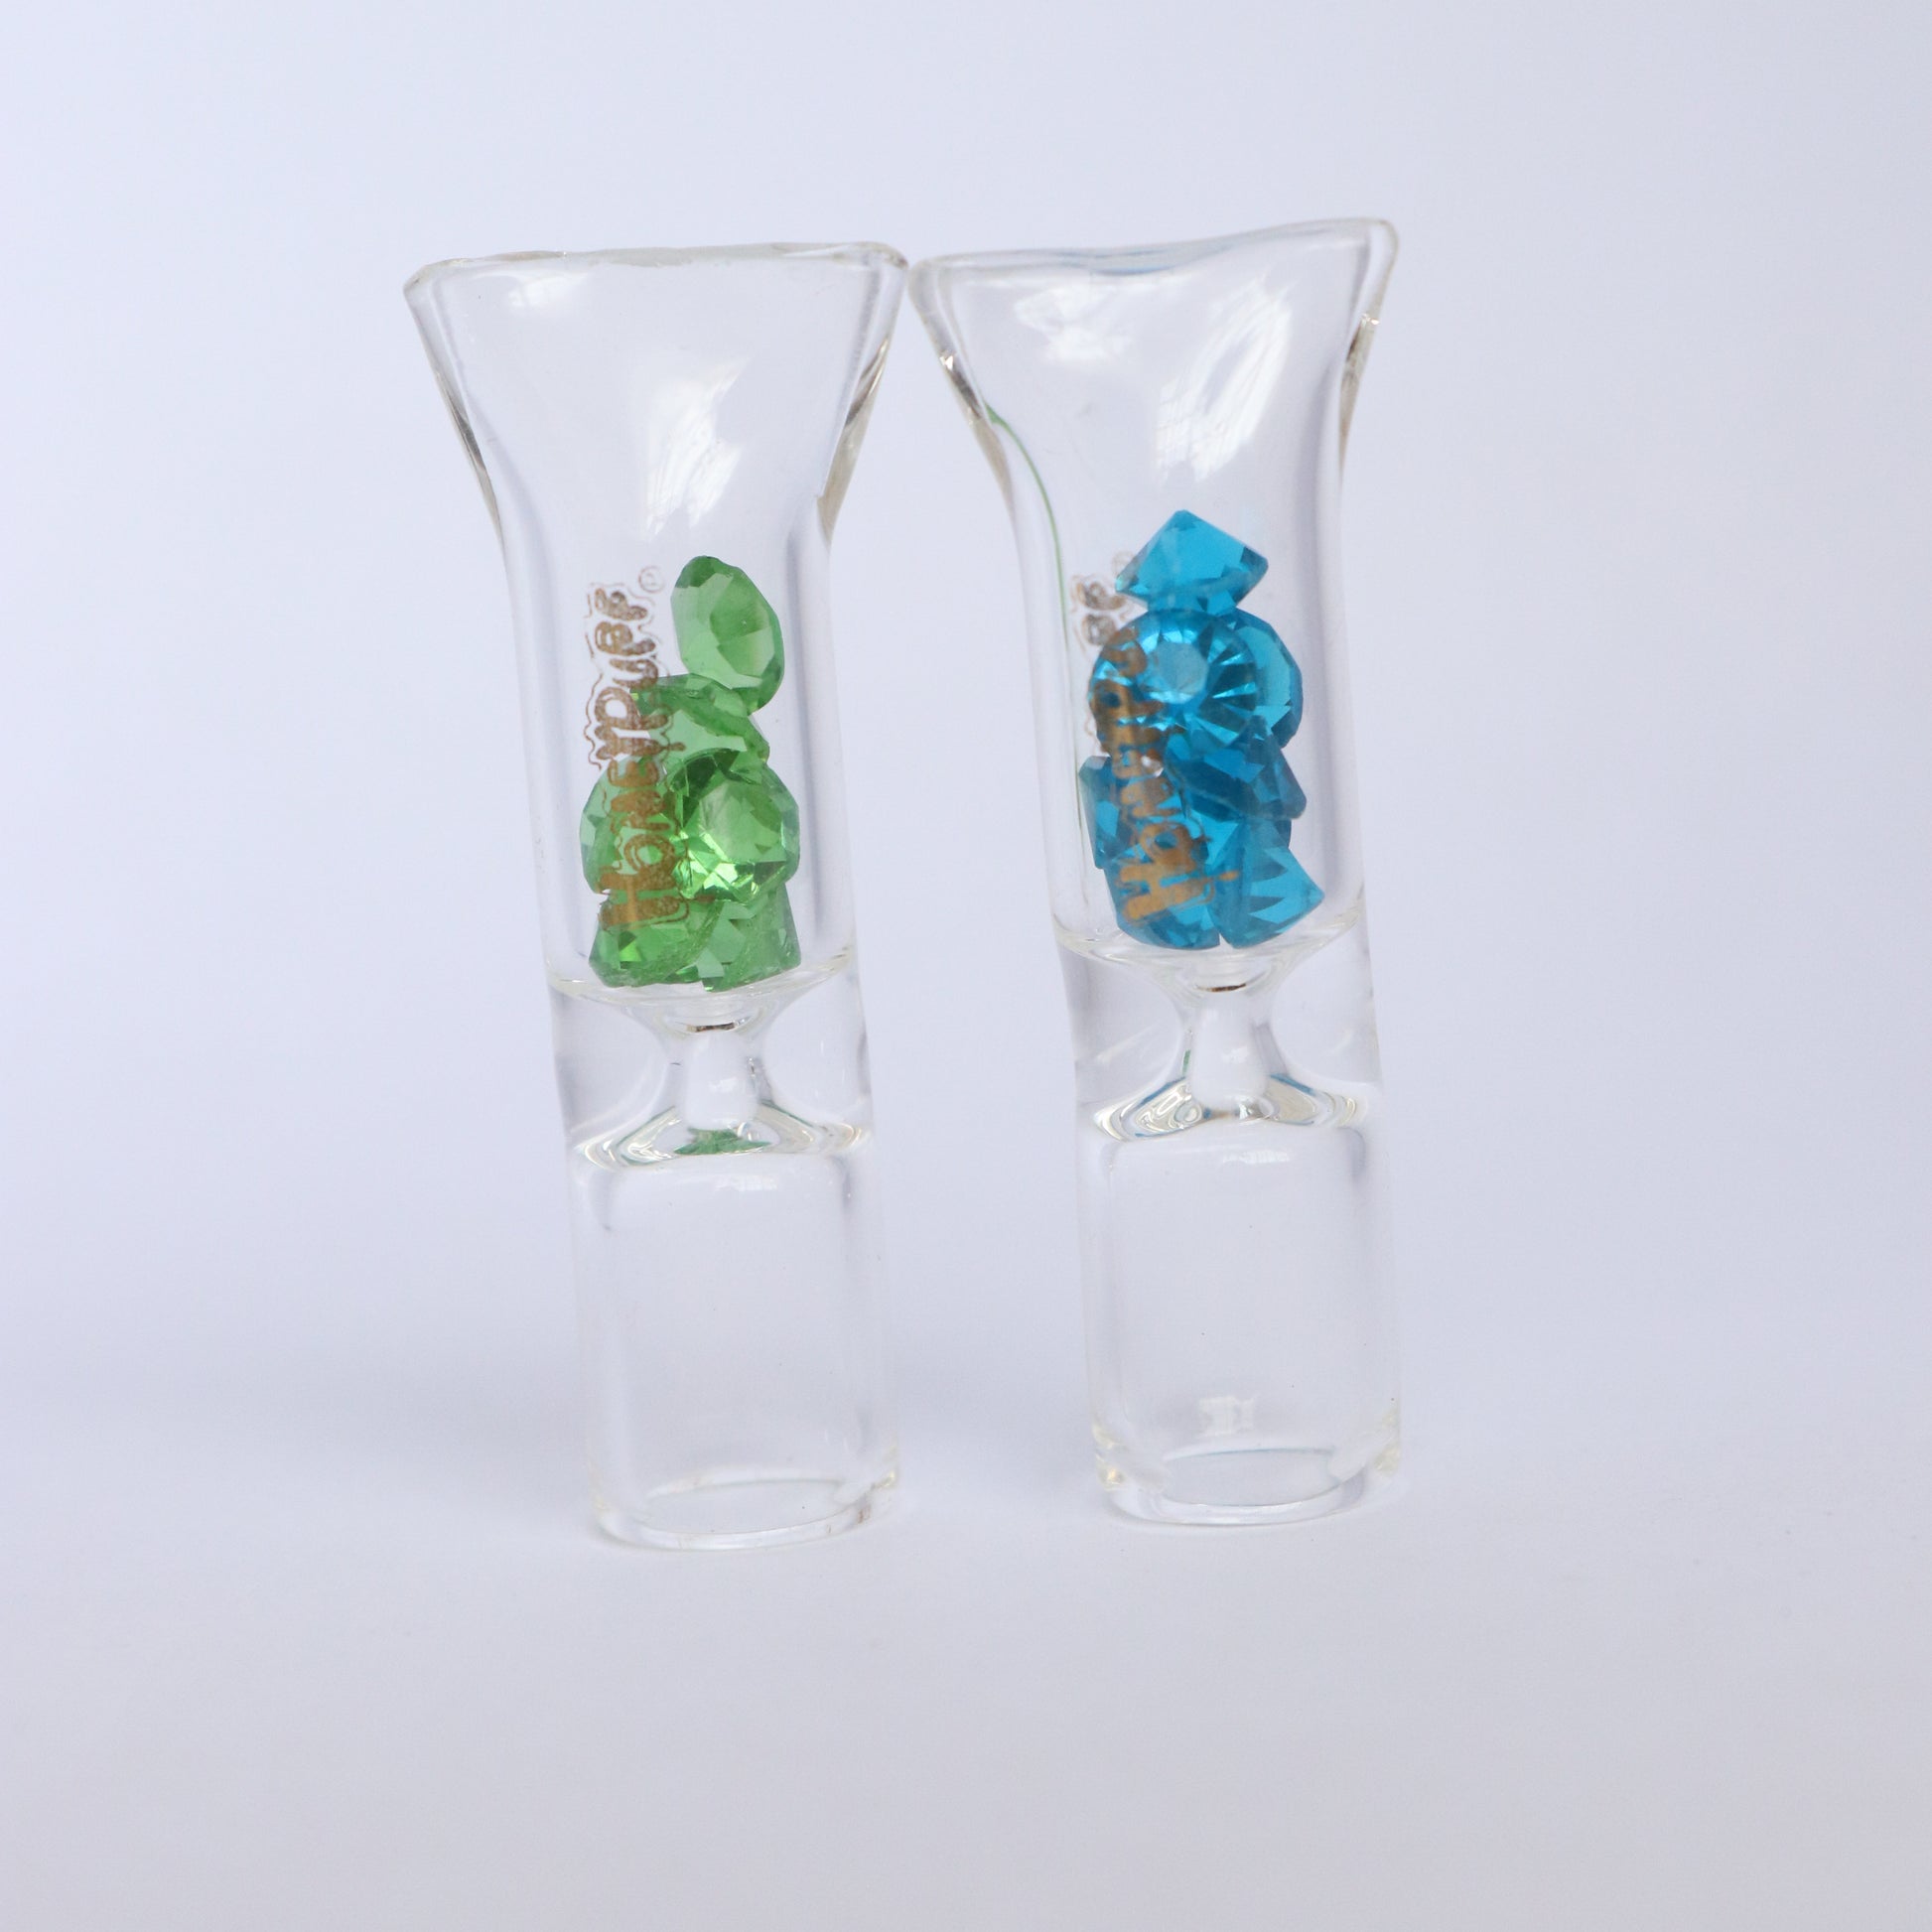 One Hitter Diamond Glass Pipes, Chillum Glass Smoking Pipes, Best Seller  One Hitter Pipes